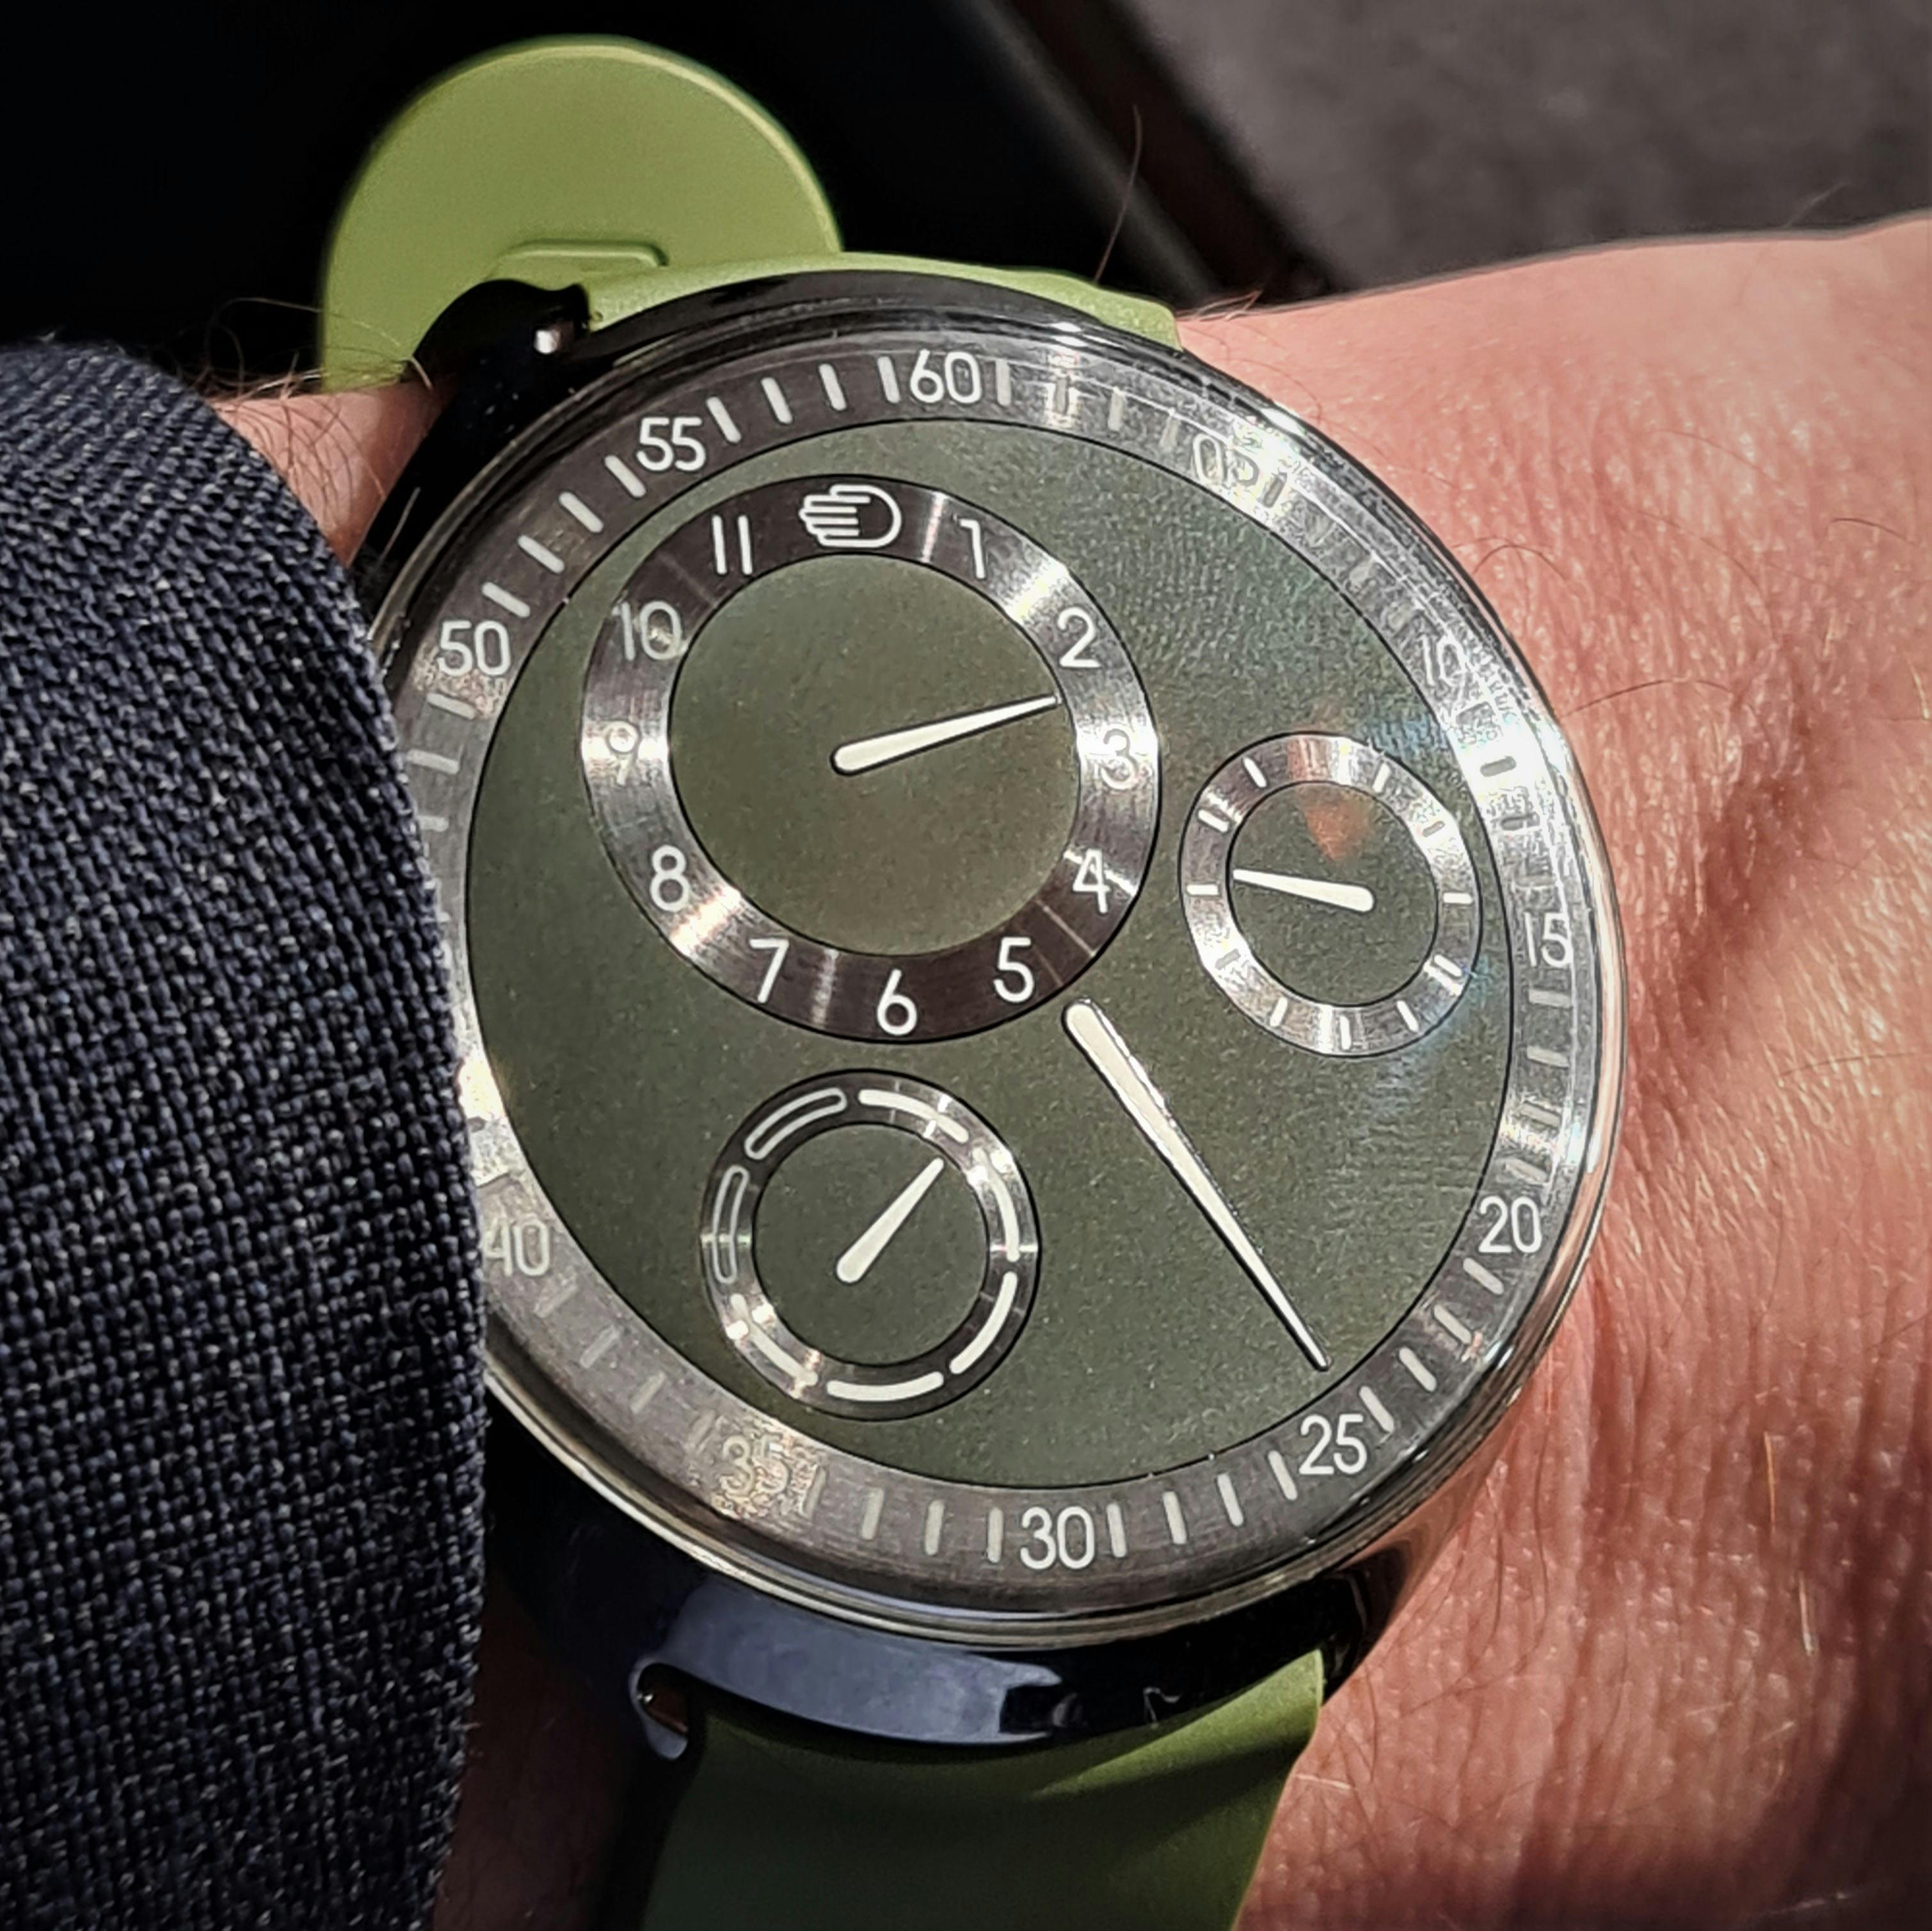 Ressence Watch with Subdials that rotate using ball bearings and magnets.